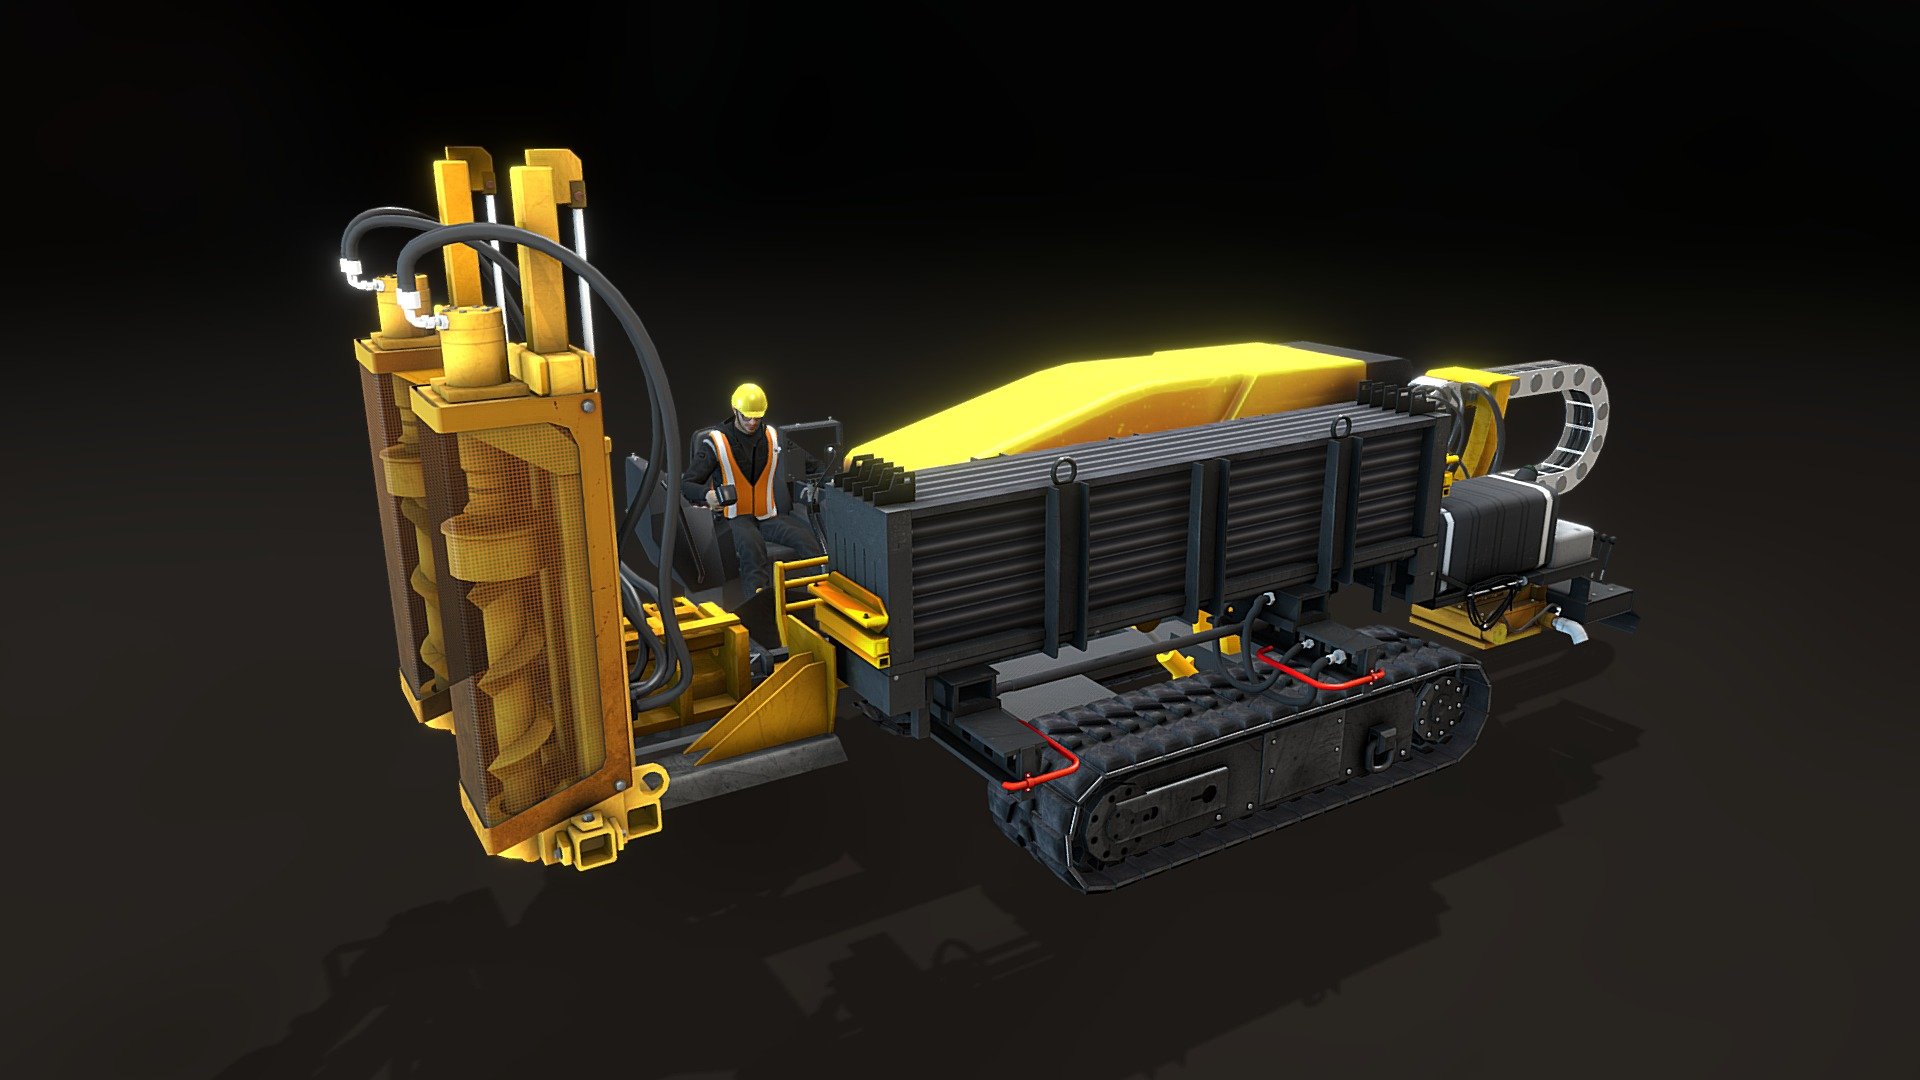 A horizontal directional drilling (HDD) machine by Vermeer, a prominent company known for providing drilling machines for wiring, sewer installation, and pipeline installation on roads, was utilized in a project created with personal interest. This project, designed for Oculus as part of a Meta project, features very low poly count with realistic textures, baked textures and maps 3d model